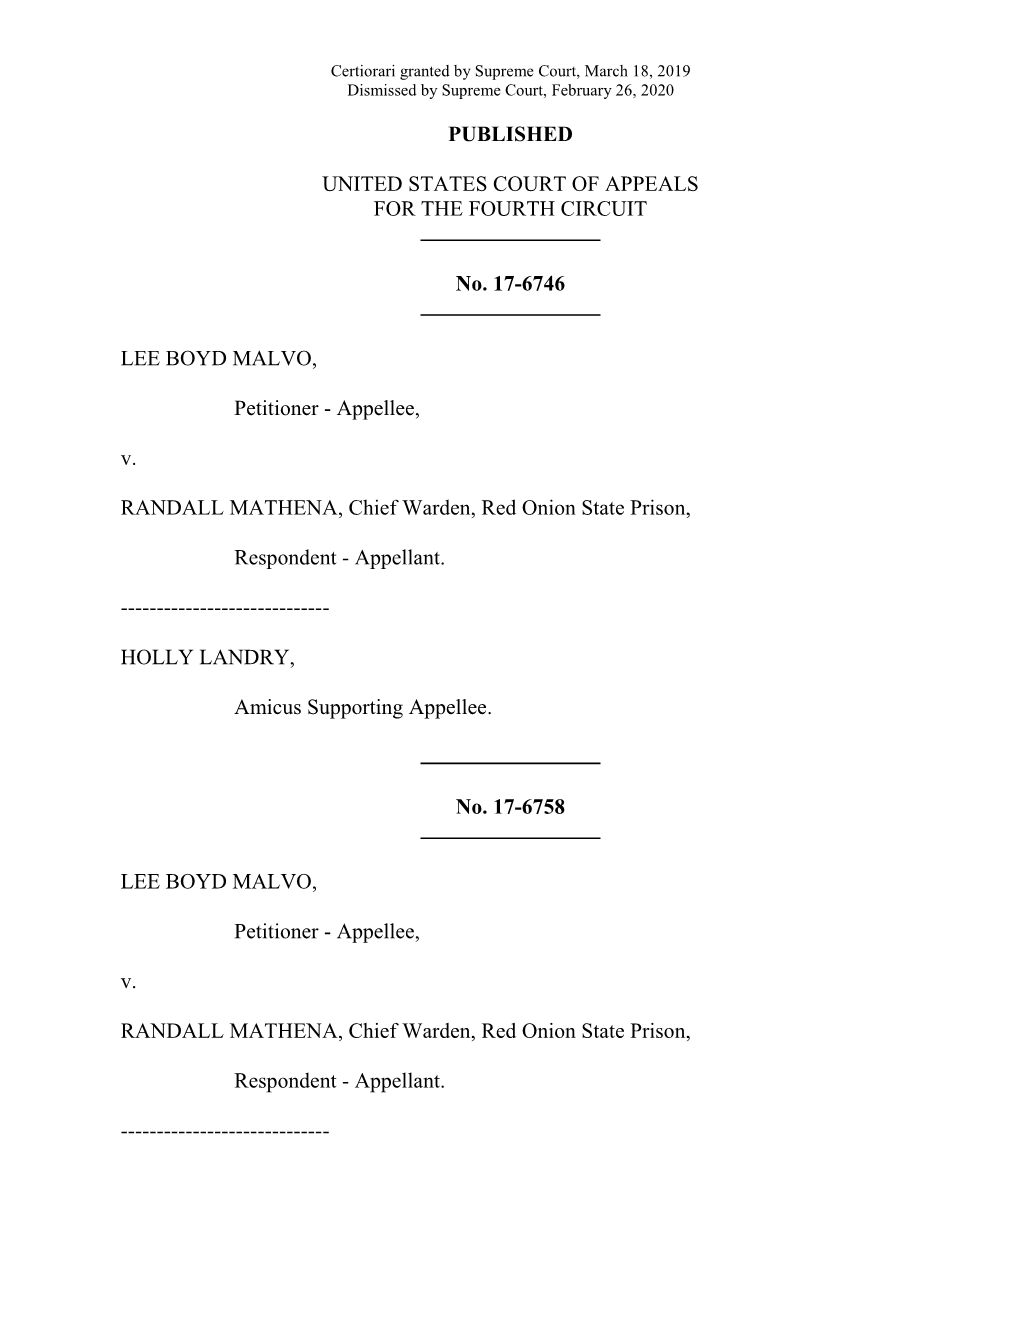 Published United States Court of Appeals for The